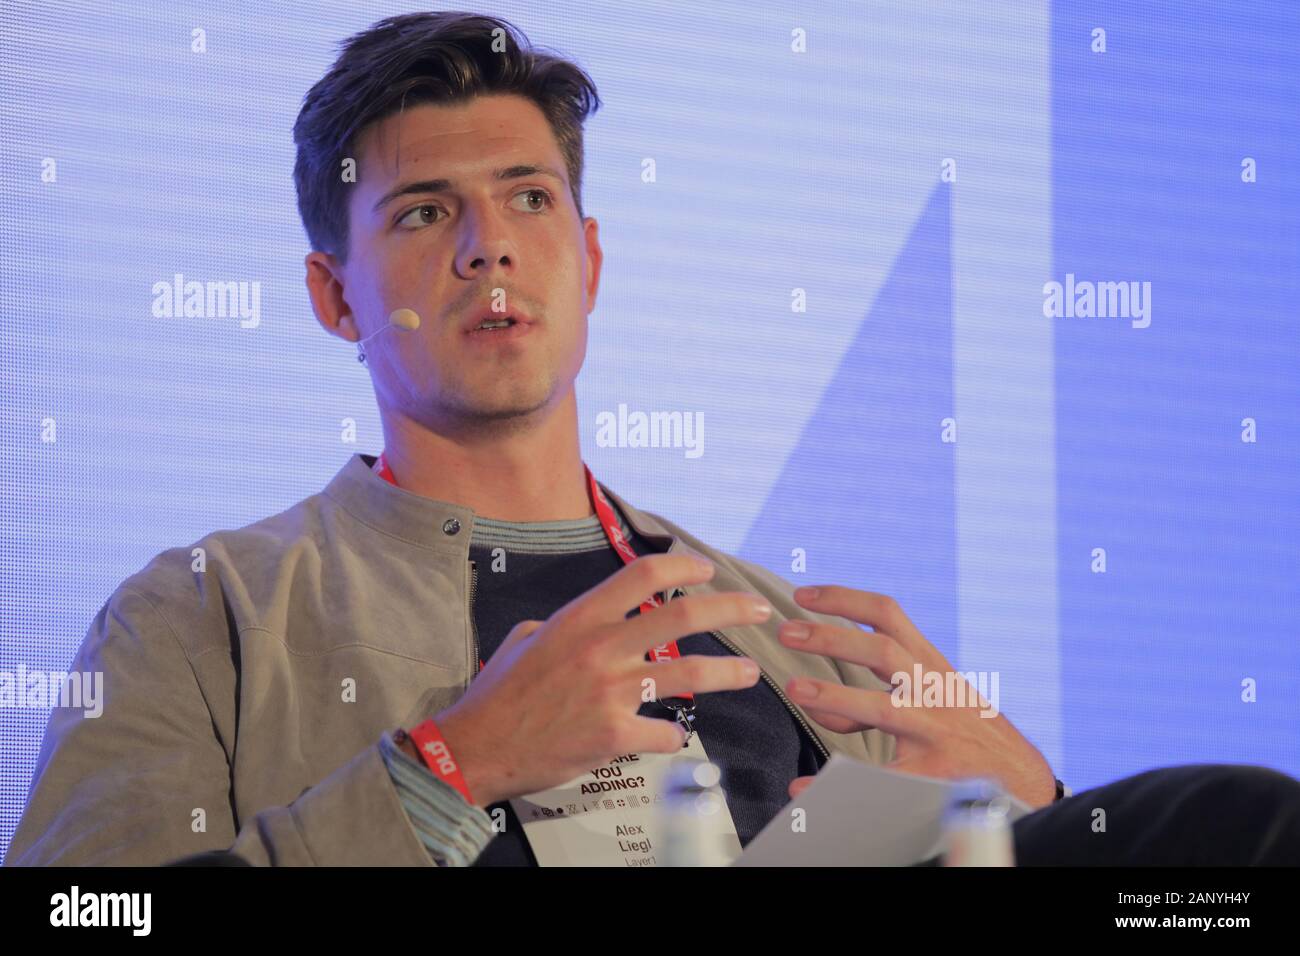 Munich, Bavaria. 19th Jan, 2020. Alexander Liegl (Co-Founder and CEO Layer1) speaks during a panel at DLD Munich Conference 2020, Europe's big innovation conference, Alte Kongresshalle, Munich, January 18-20, 2020 Picture Alliance for DLD/Hubert Burda Media | usage worldwide Credit: dpa/Alamy Live News Stock Photo